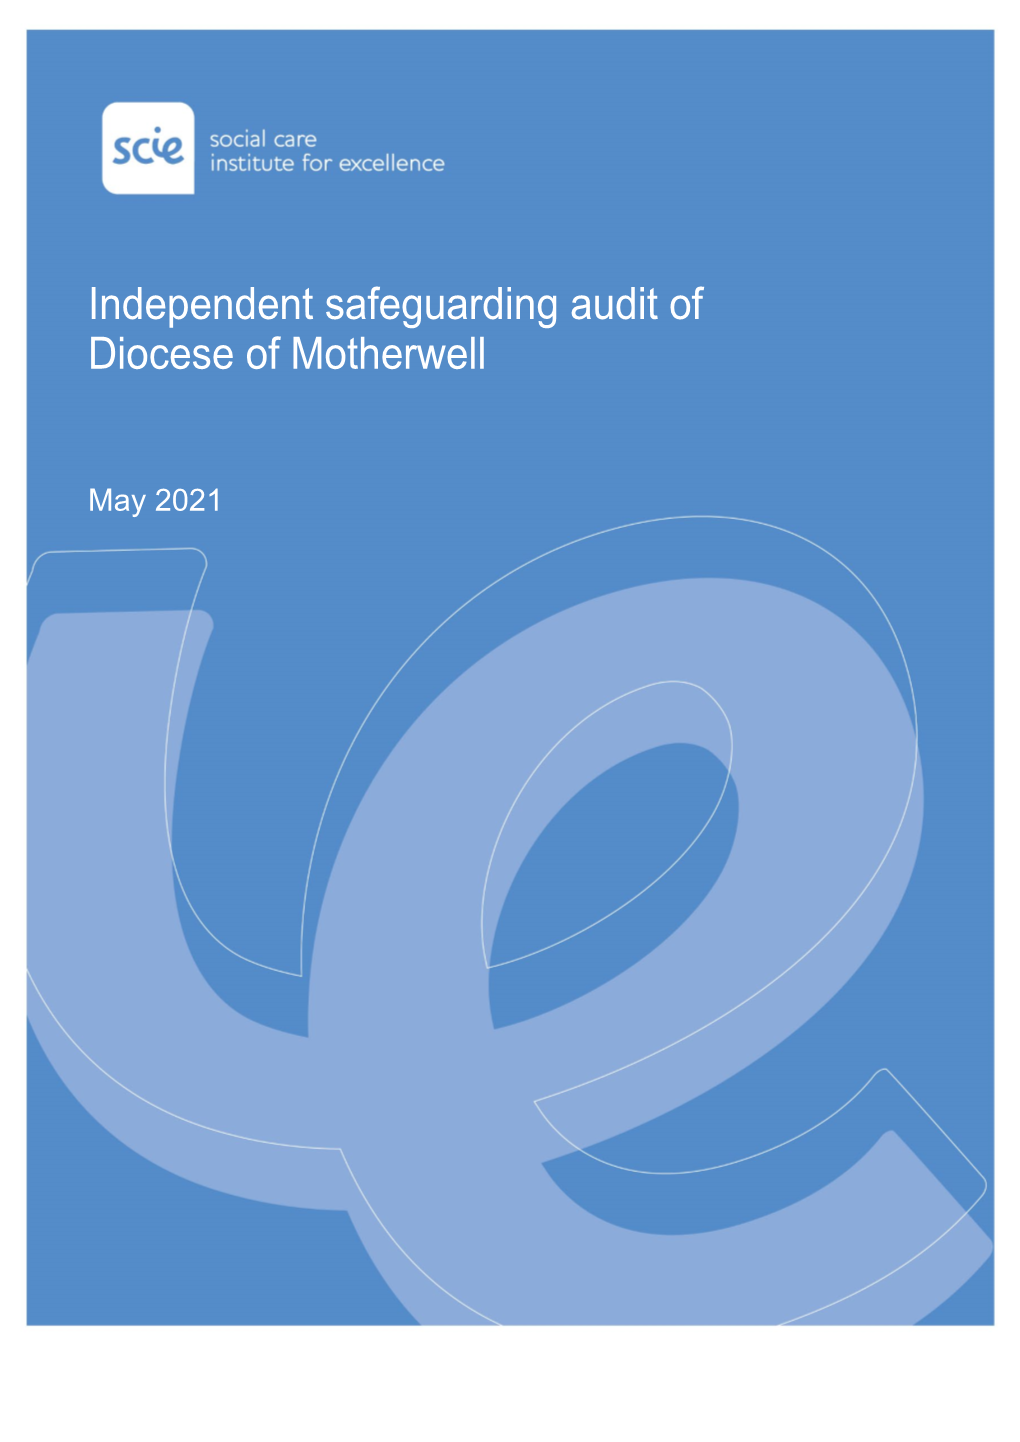 Independent Safeguarding Audit of Diocese of Motherwell